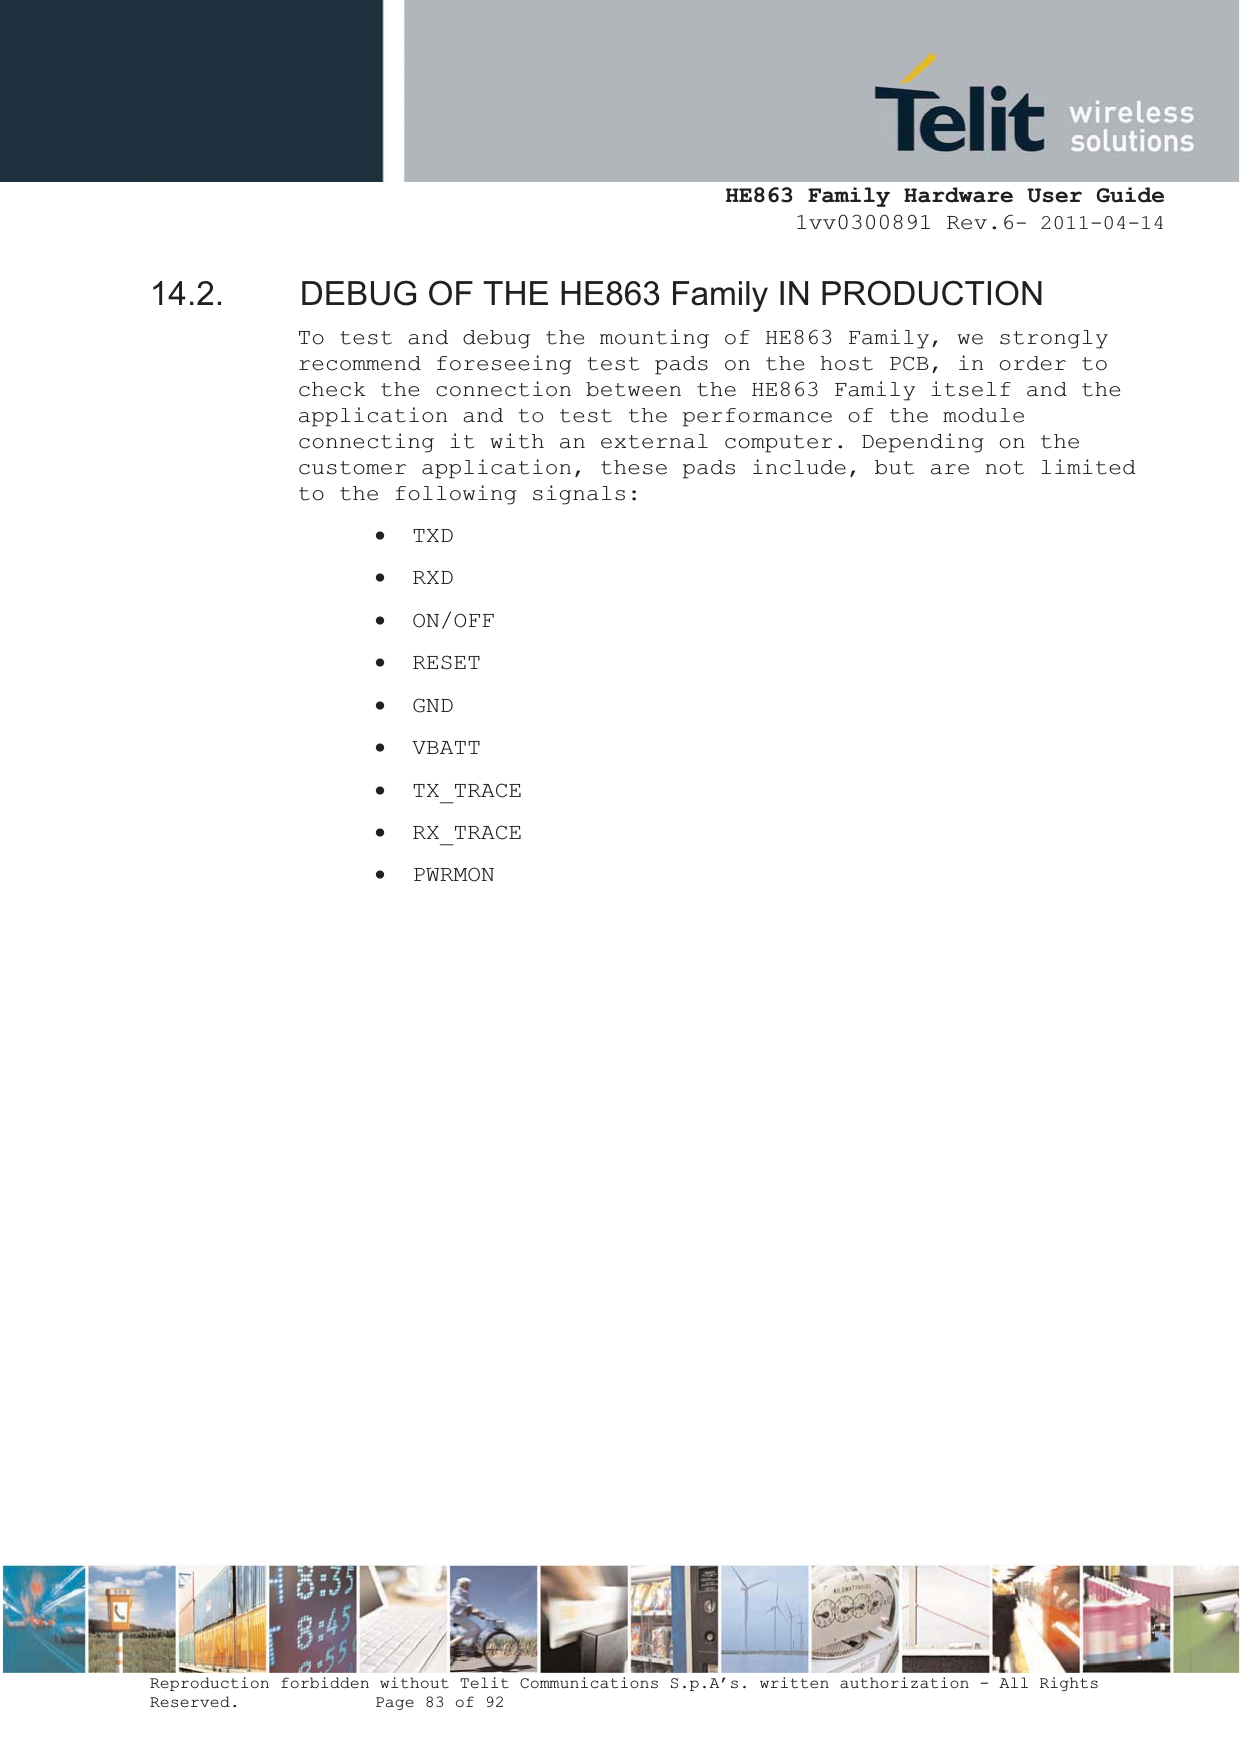  HE863 Family Hardware User Guide 1vv0300891 Rev.6- 2011-04-14    Reproduction forbidden without Telit Communications S.p.A’s. written authorization - All Rights Reserved.    Page 83 of 92  14.2.  DEBUG OF THE HE863 Family IN PRODUCTION To test and debug the mounting of HE863 Family, we strongly recommend foreseeing test pads on the host PCB, in order to check the connection between the HE863 Family itself and the application and to test the performance of the module connecting it with an external computer. Depending on the customer application, these pads include, but are not limited to the following signals: x TXD x RXD x ON/OFF x RESET x GND x VBATT x TX_TRACE x RX_TRACE x PWRMON                  